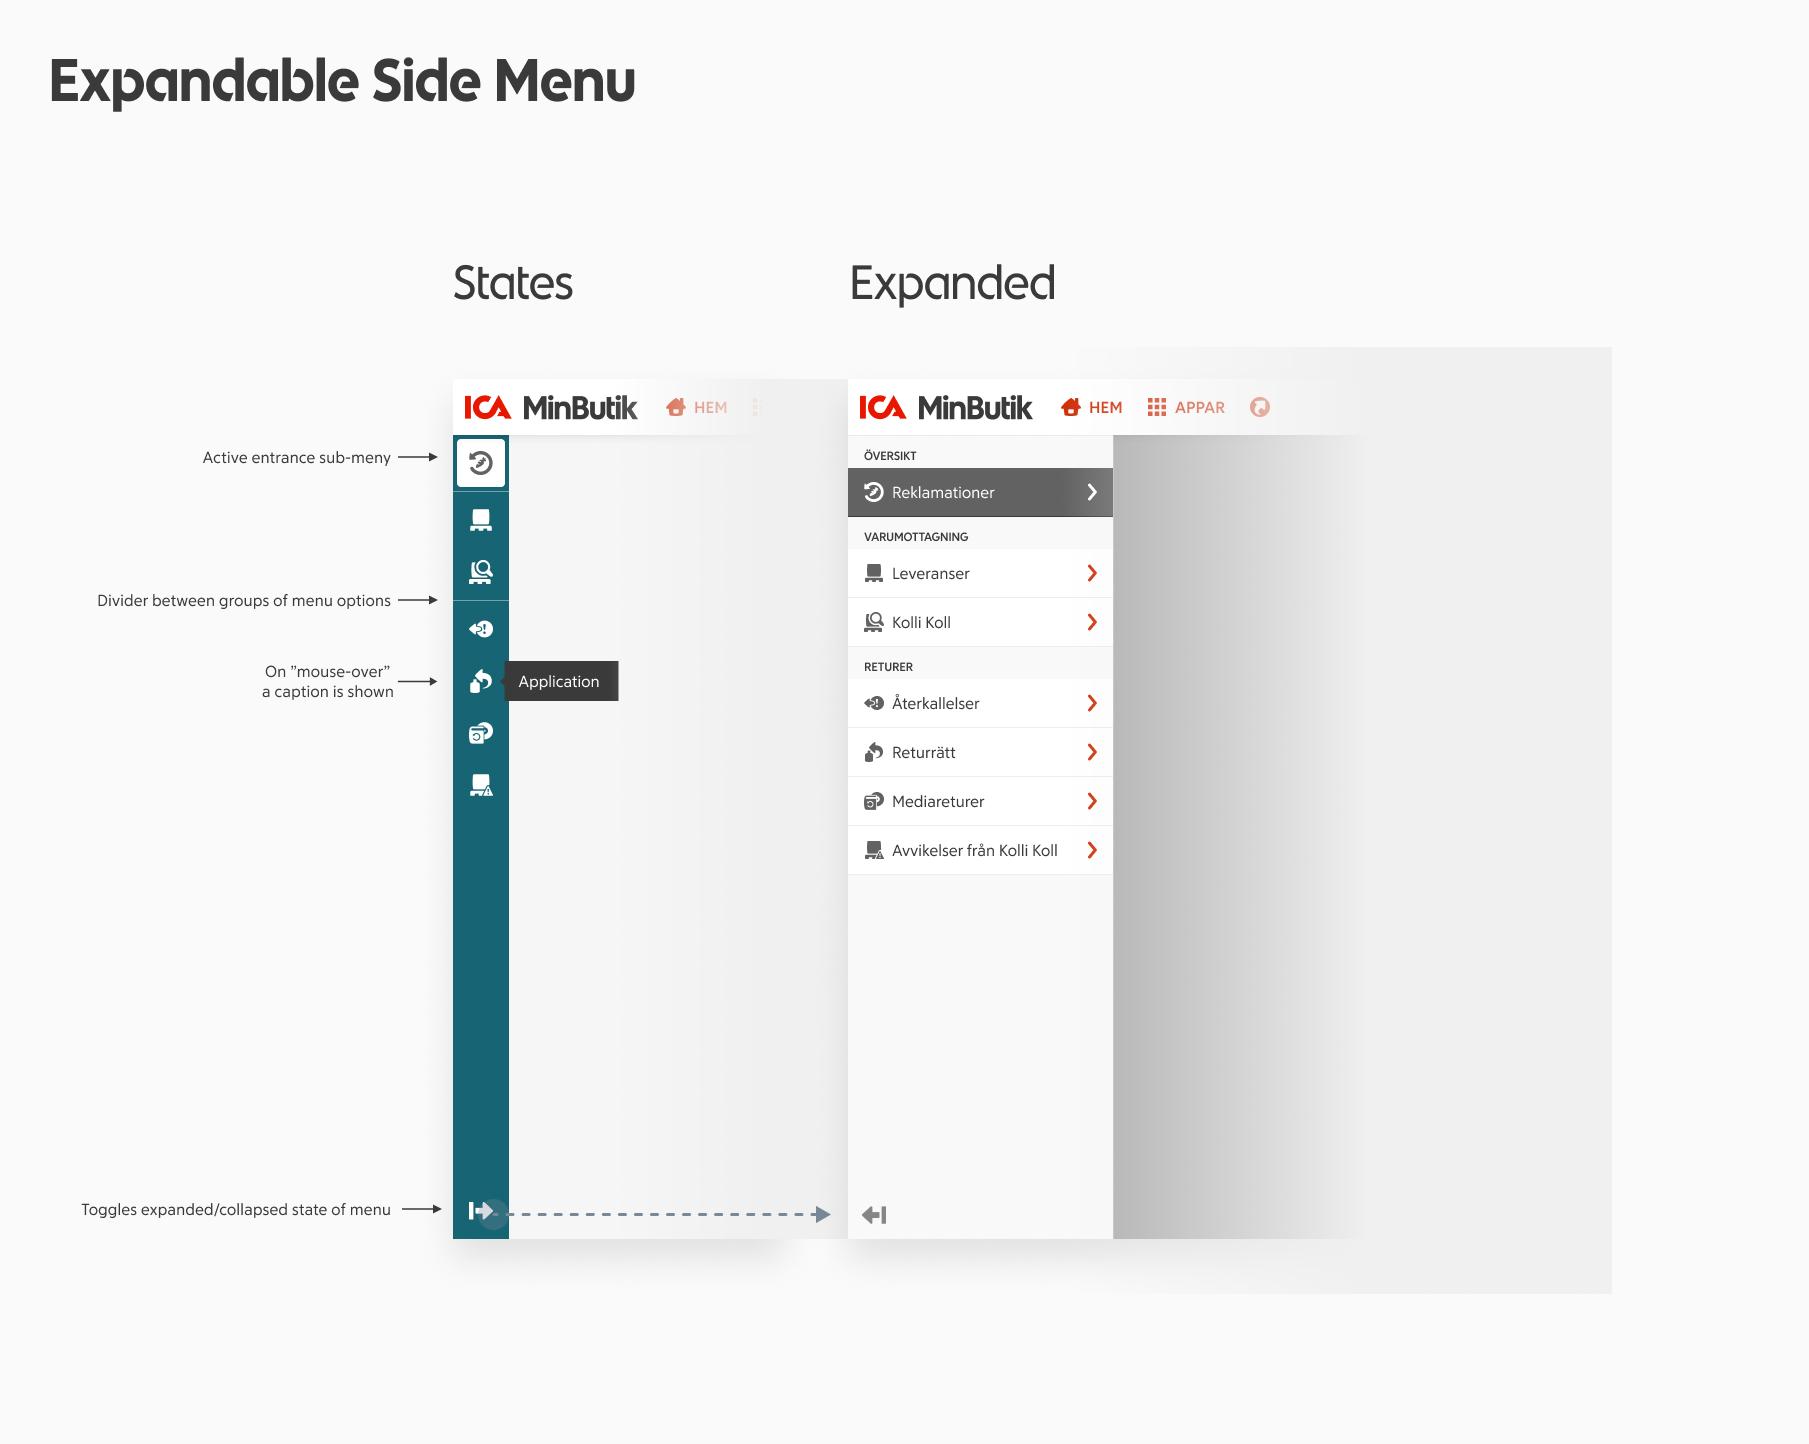 Illustration of an expandable side menu in two states, collapsed and expanded, showing navigation elements for a web application.